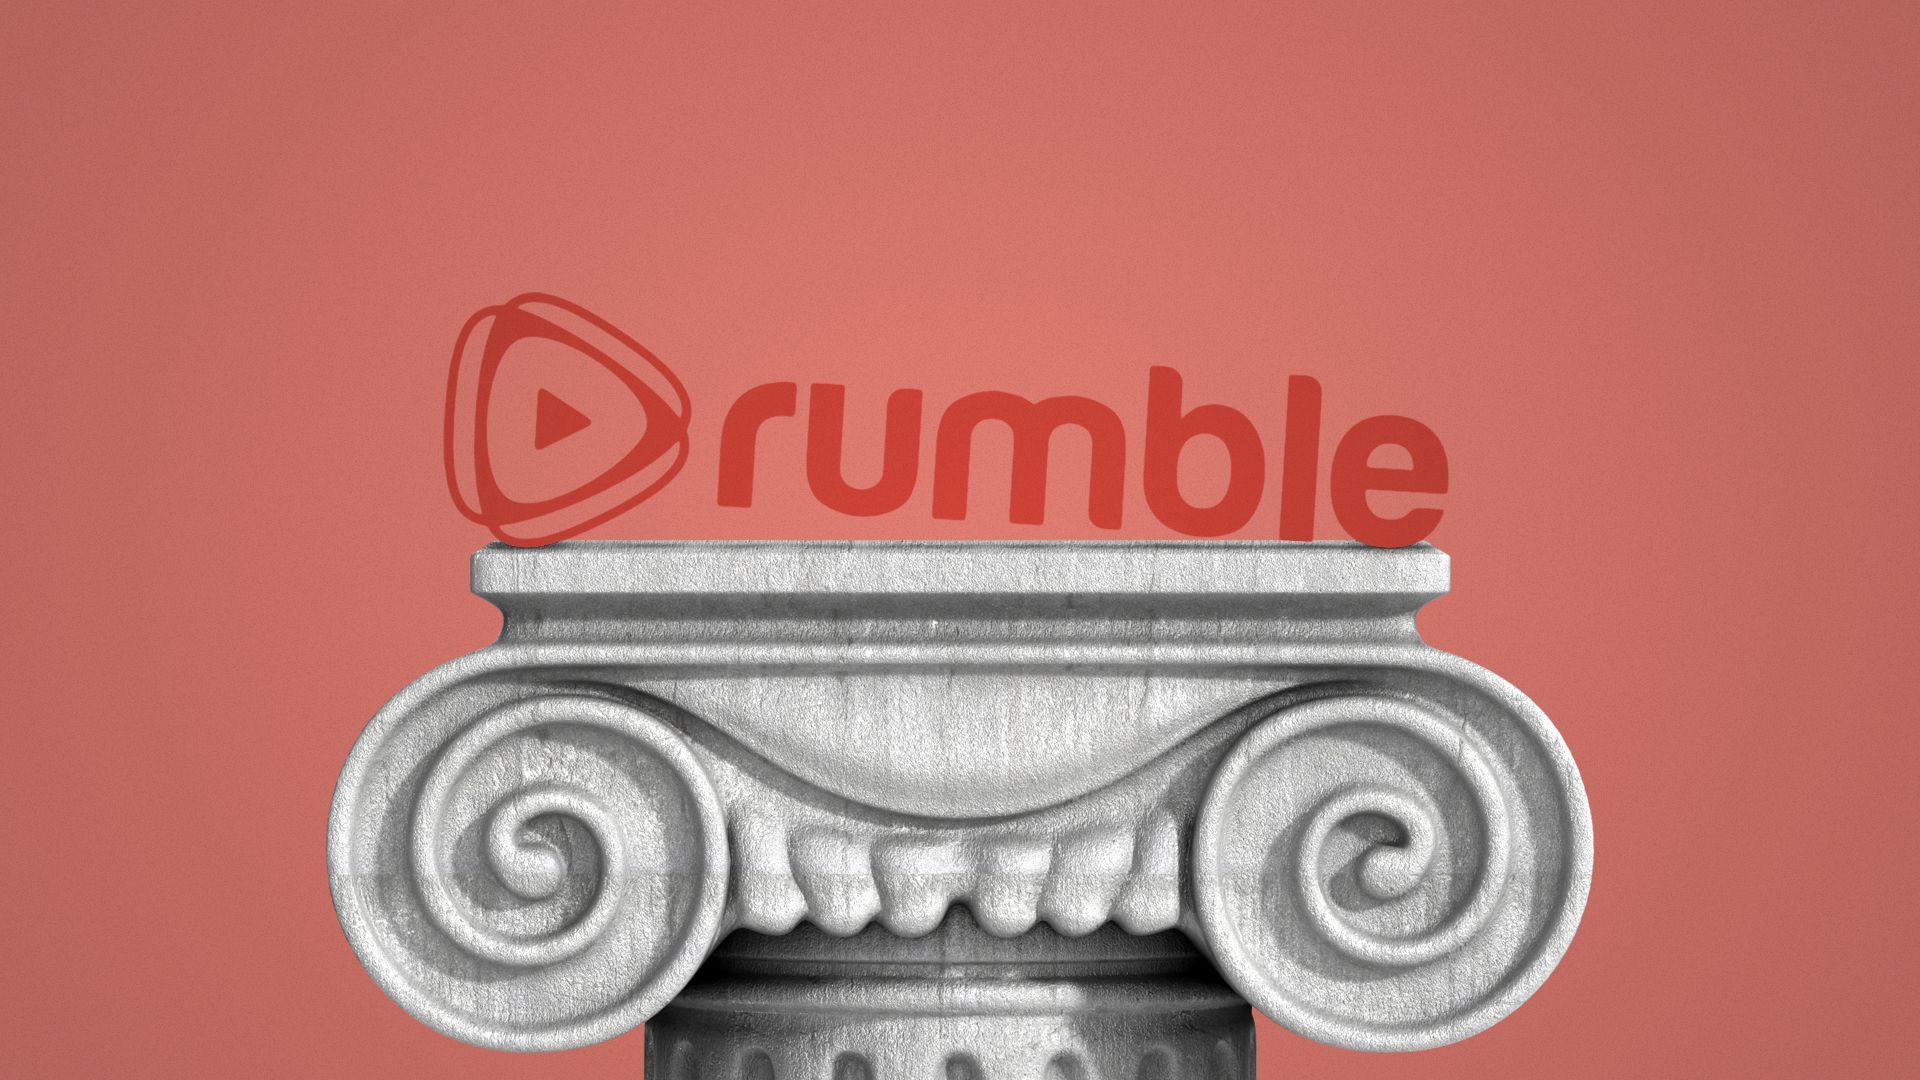 Illustration of the Rumble logo on top of a pedestal.